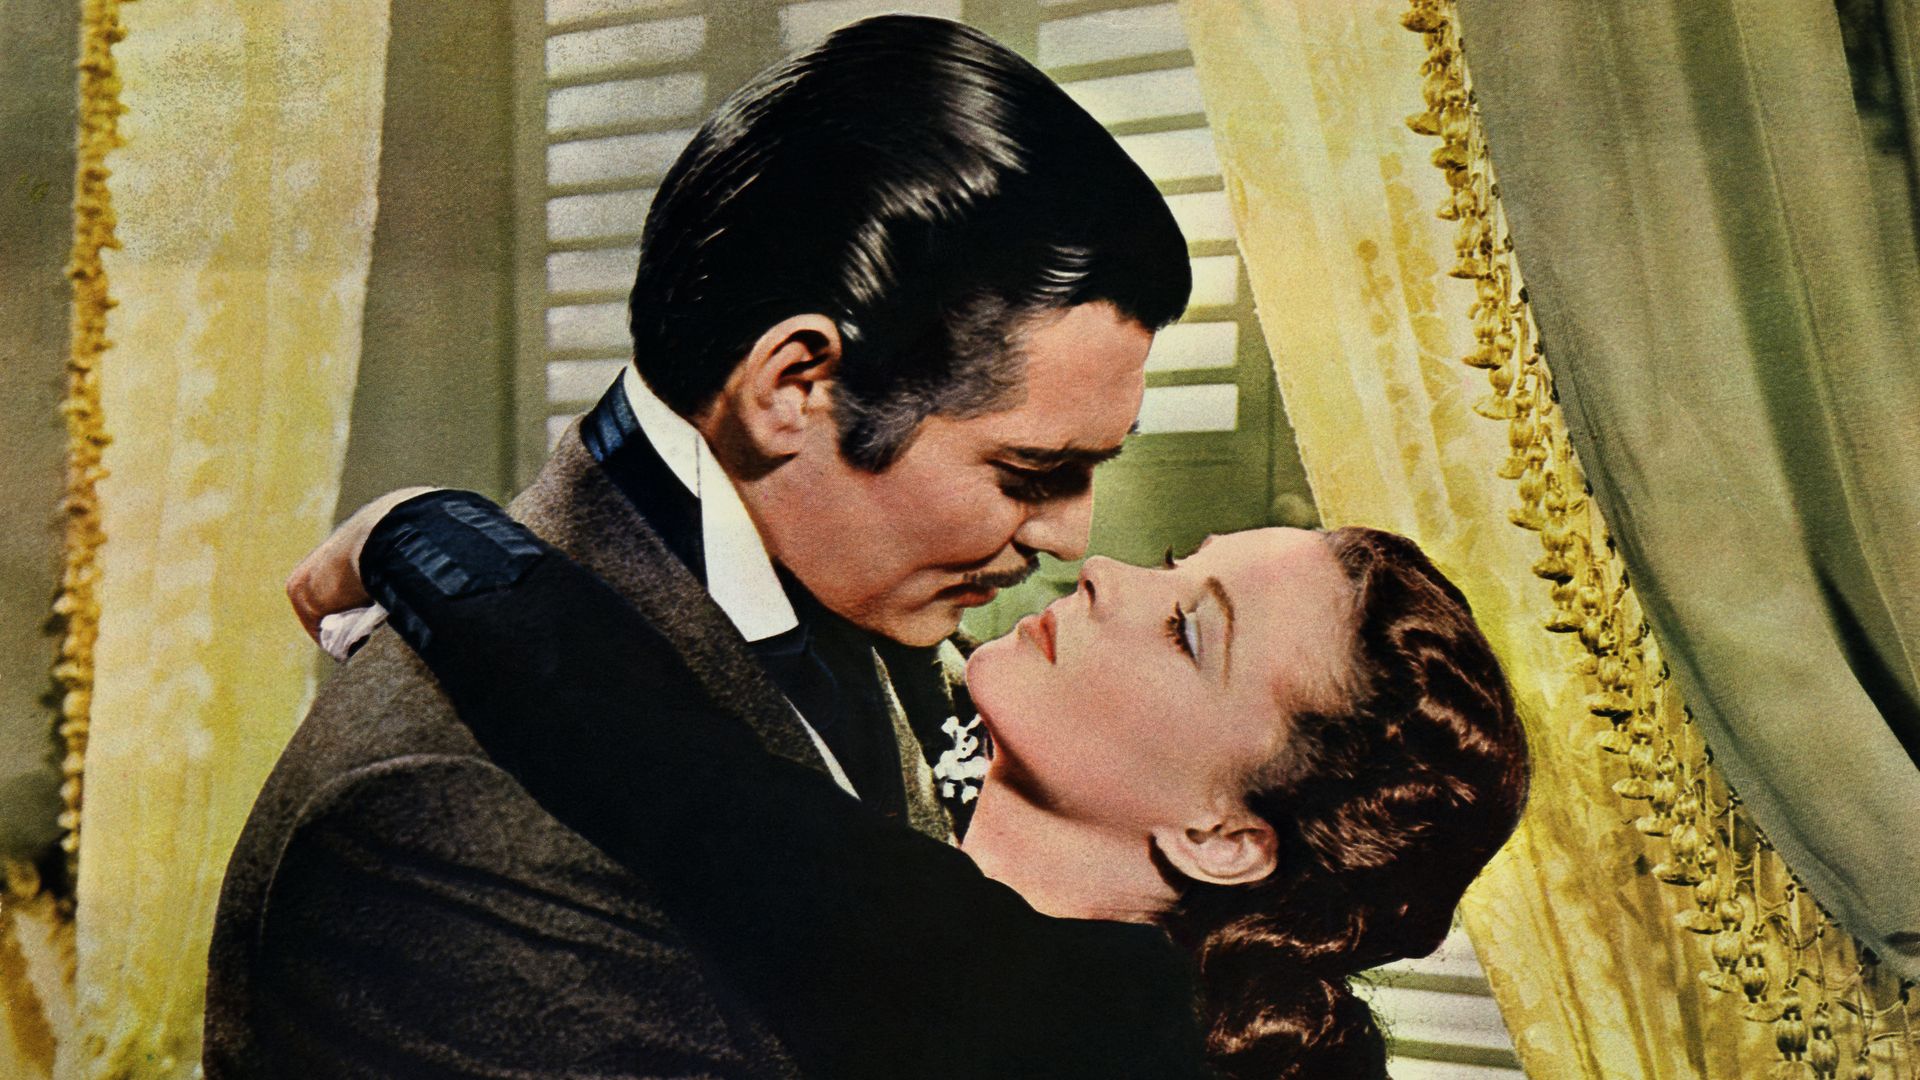 Clark Gable as Rhett Butler and Vivien Leigh as Scarlett O'Hara in the 1939 epic film "Gone with the Wind."